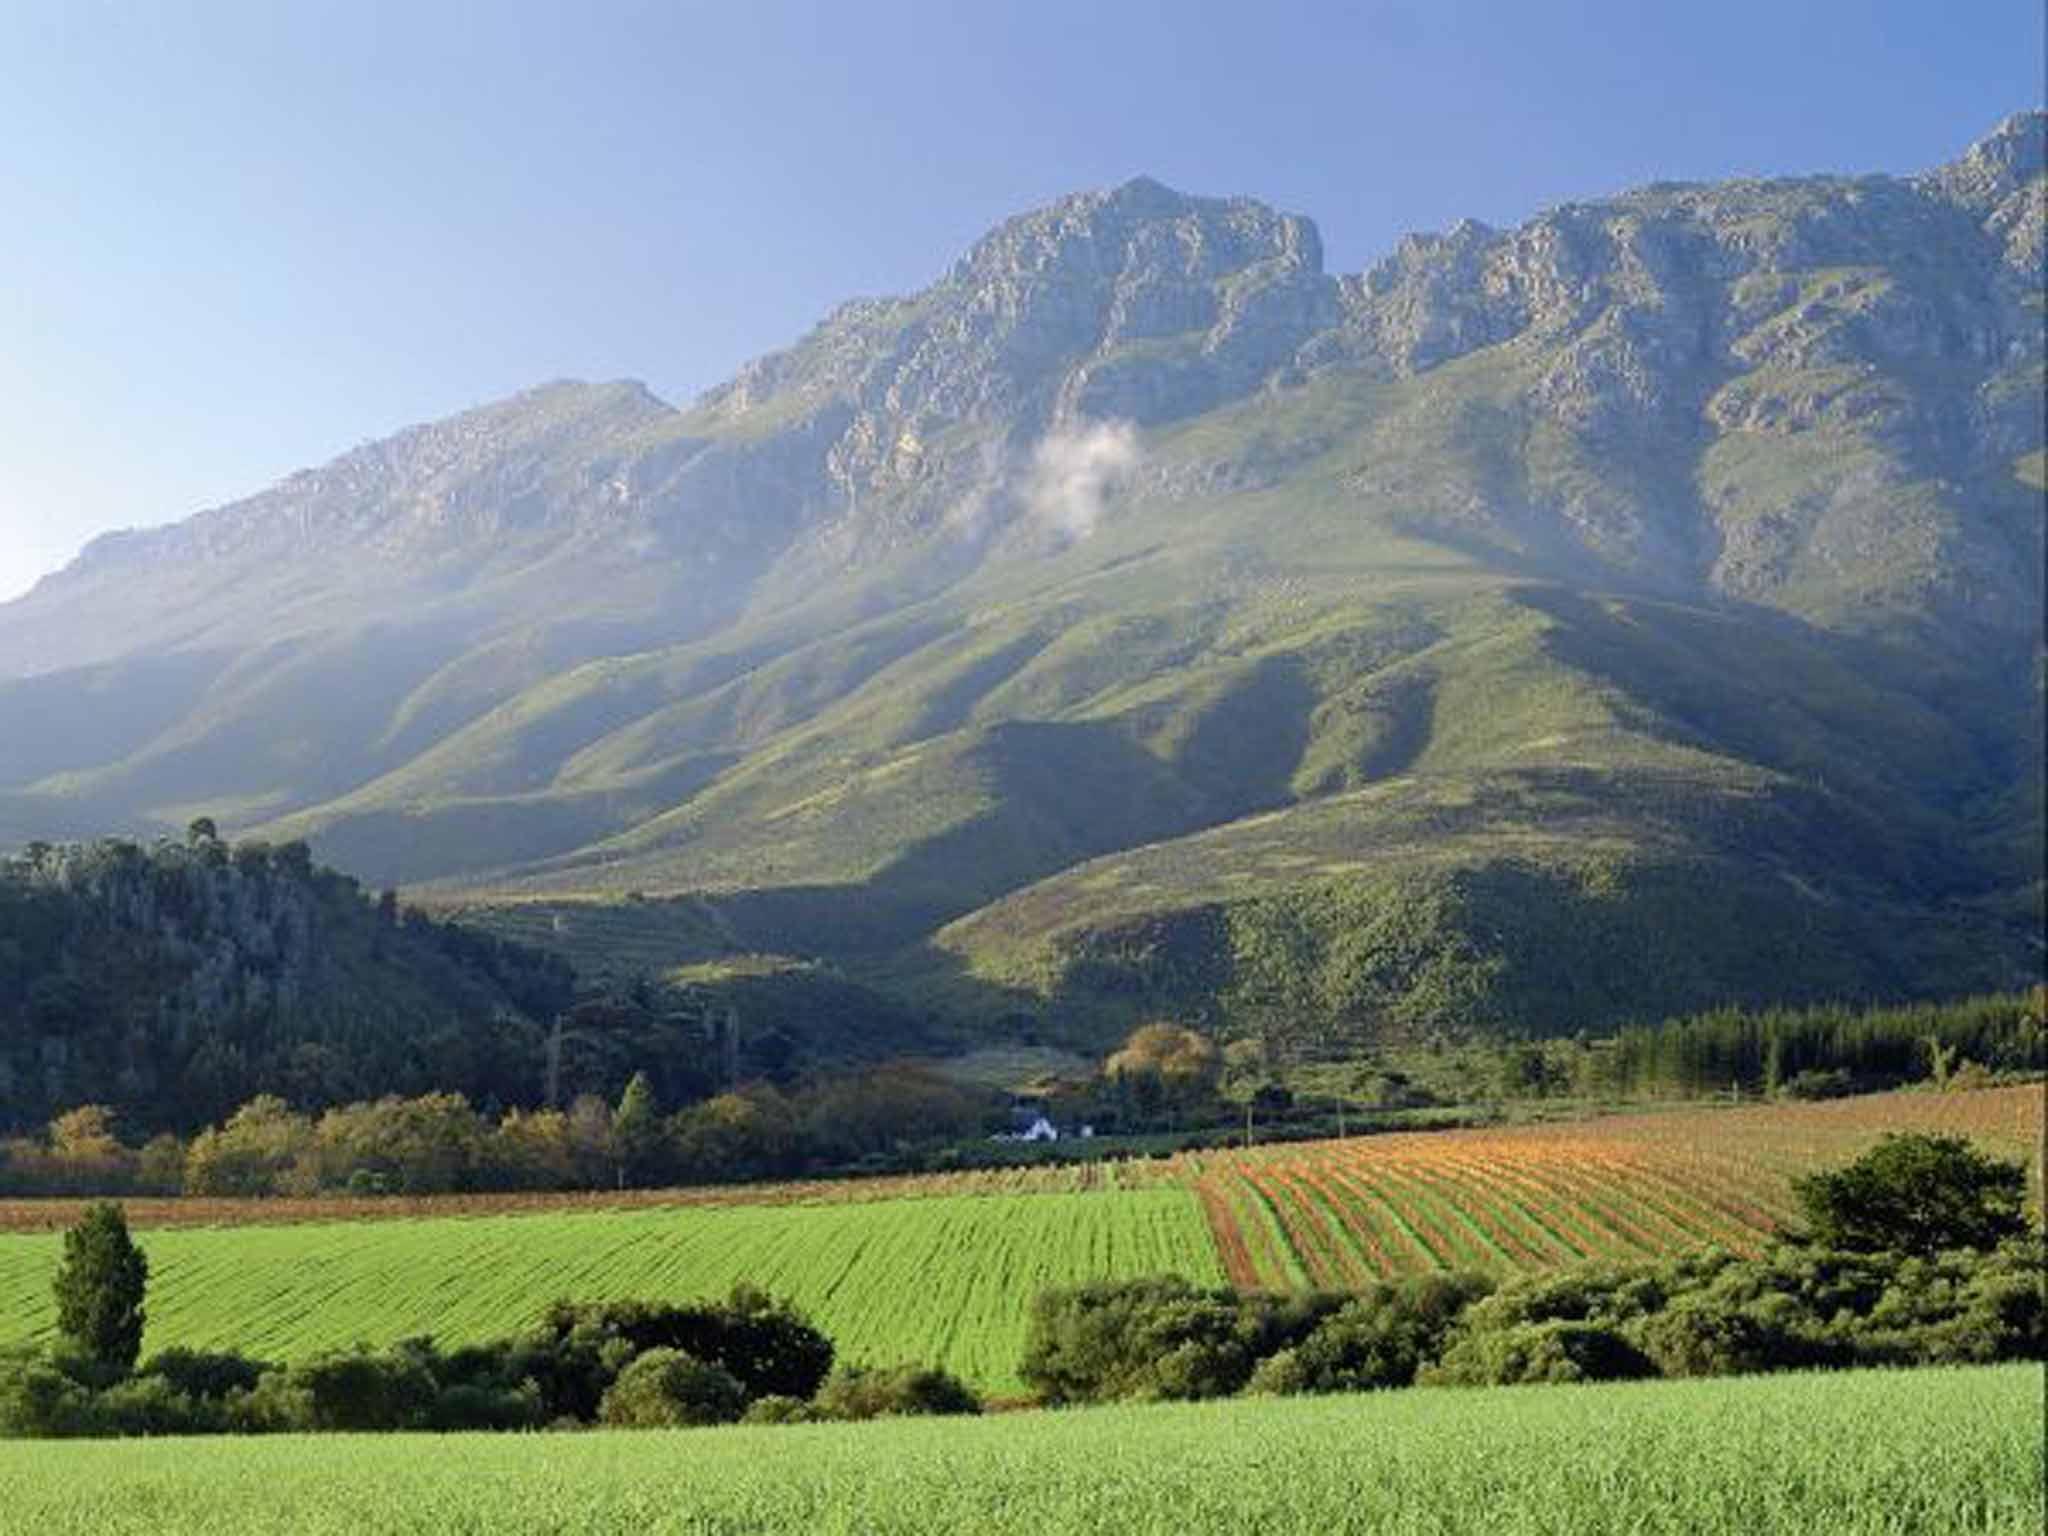 south africa's garden route: lush forest, quaint towns, lakes and